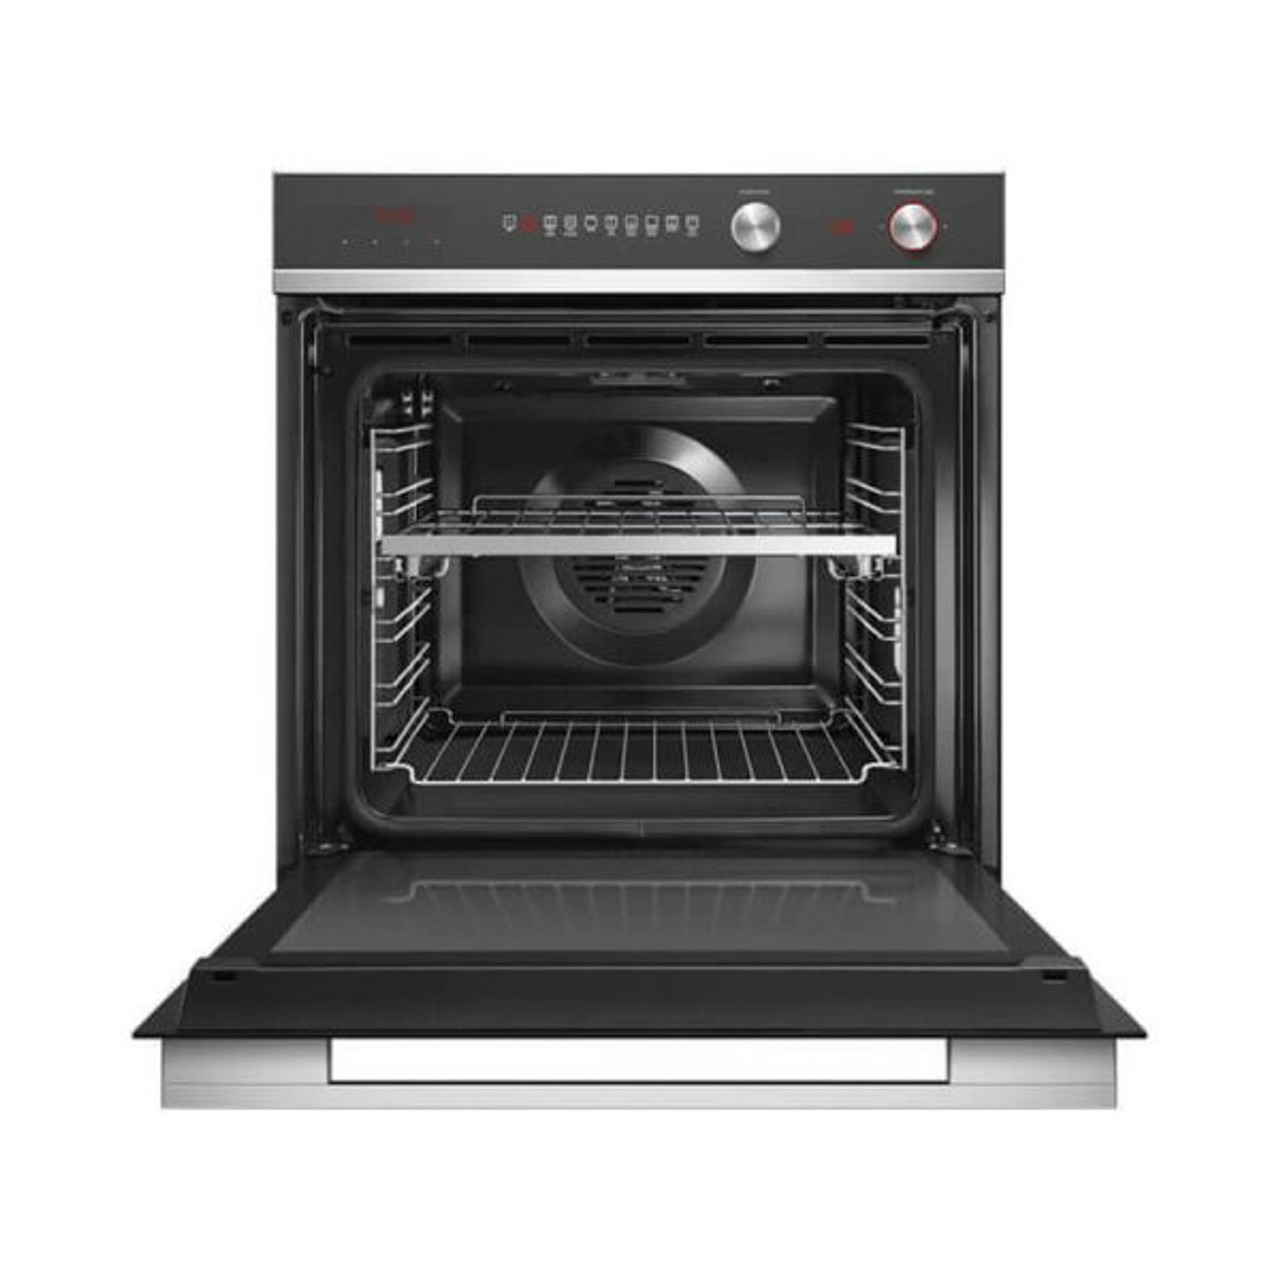 OB60SD9PX2 - 60cm 9 Function Pyrolytic Oven - Stainless Steel